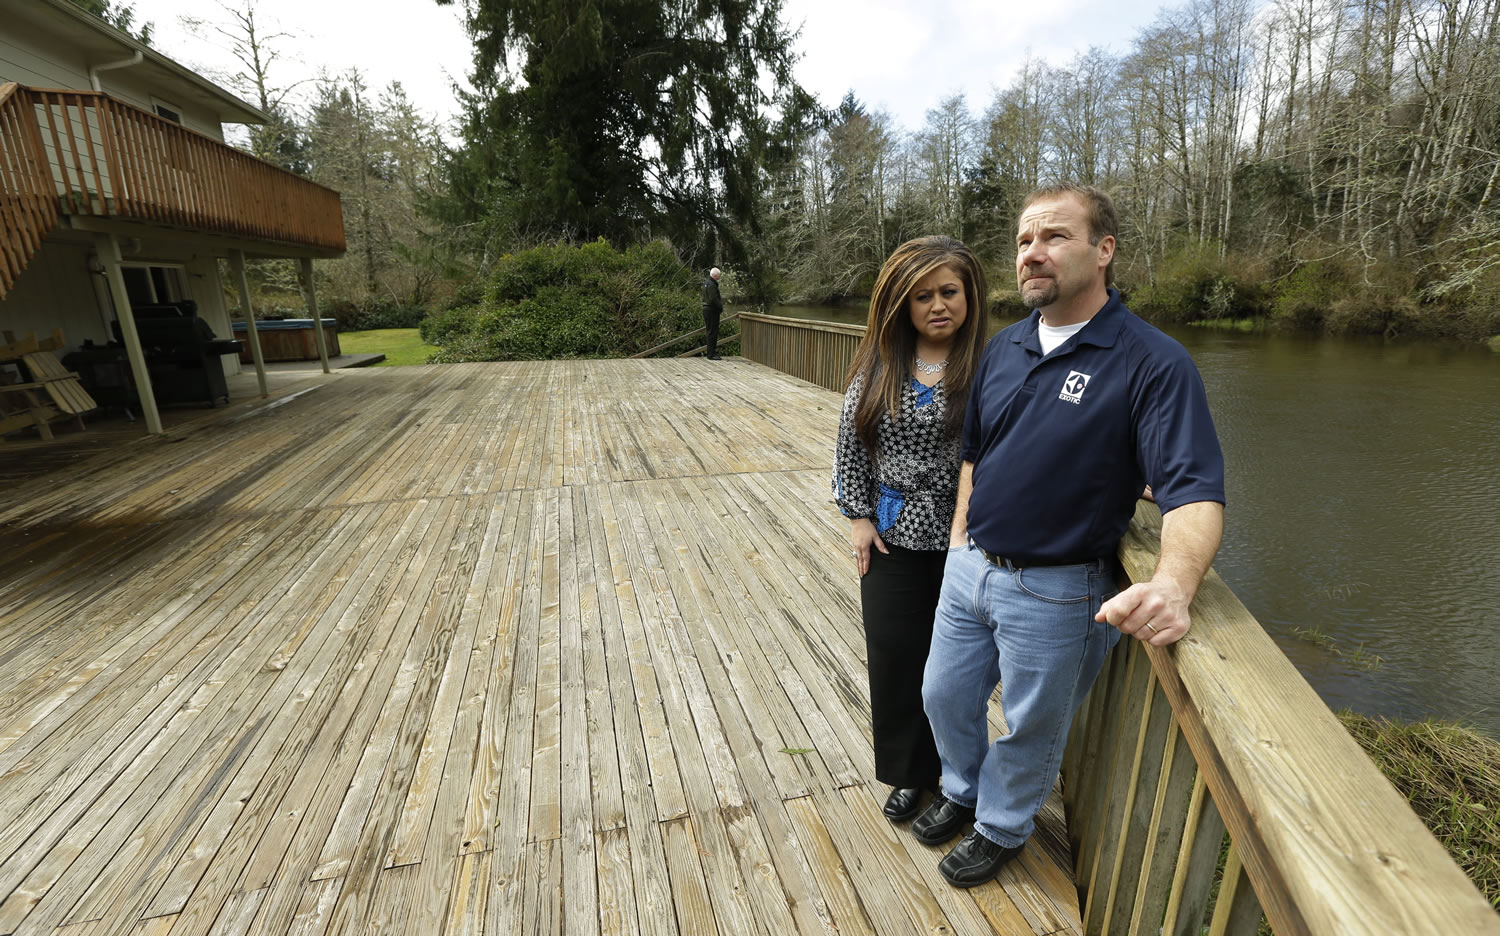 Leonor and Darrin Moir stand March 18 on the deck of the Hoquiam house they bought in 1996 on the Little Hoquiam River. The Moirs pay about $1,700 annually for flood insurance, even though they say they have never had a major flood.